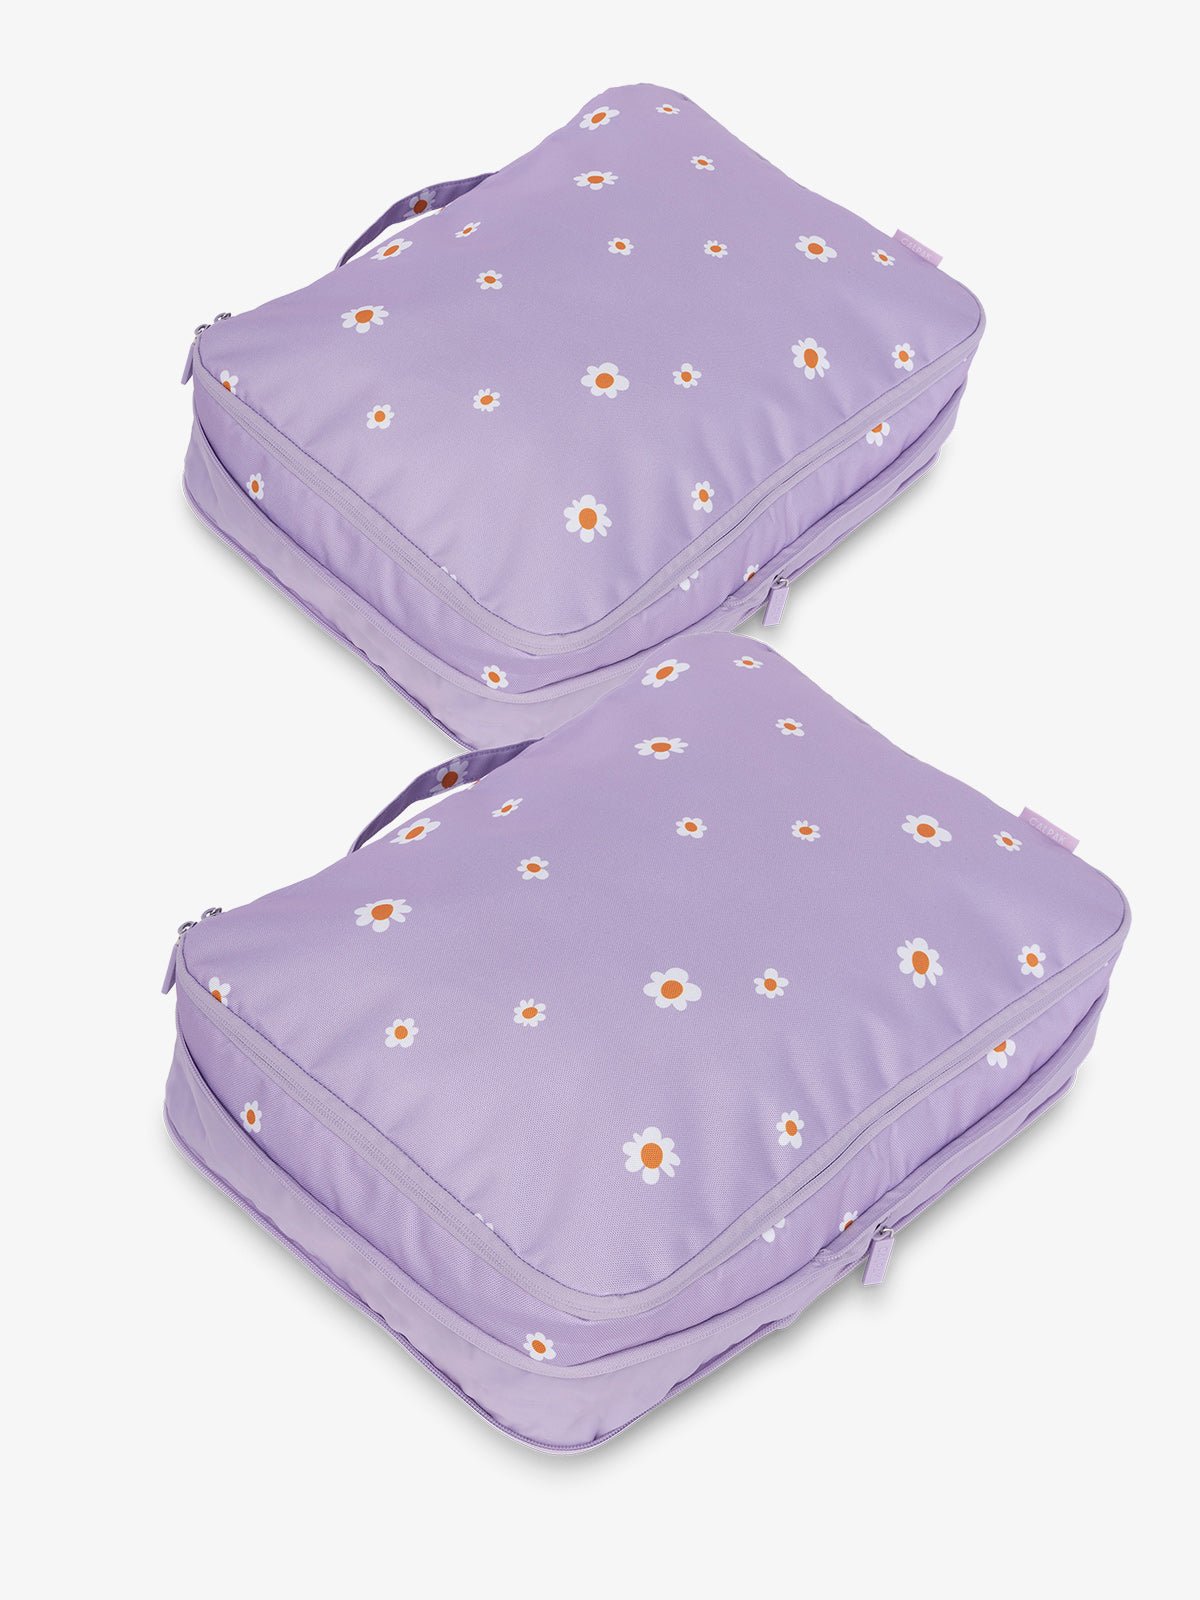 CALPAK large packing cubes with top handles and expandable by 4.5 inches in light purple floral print